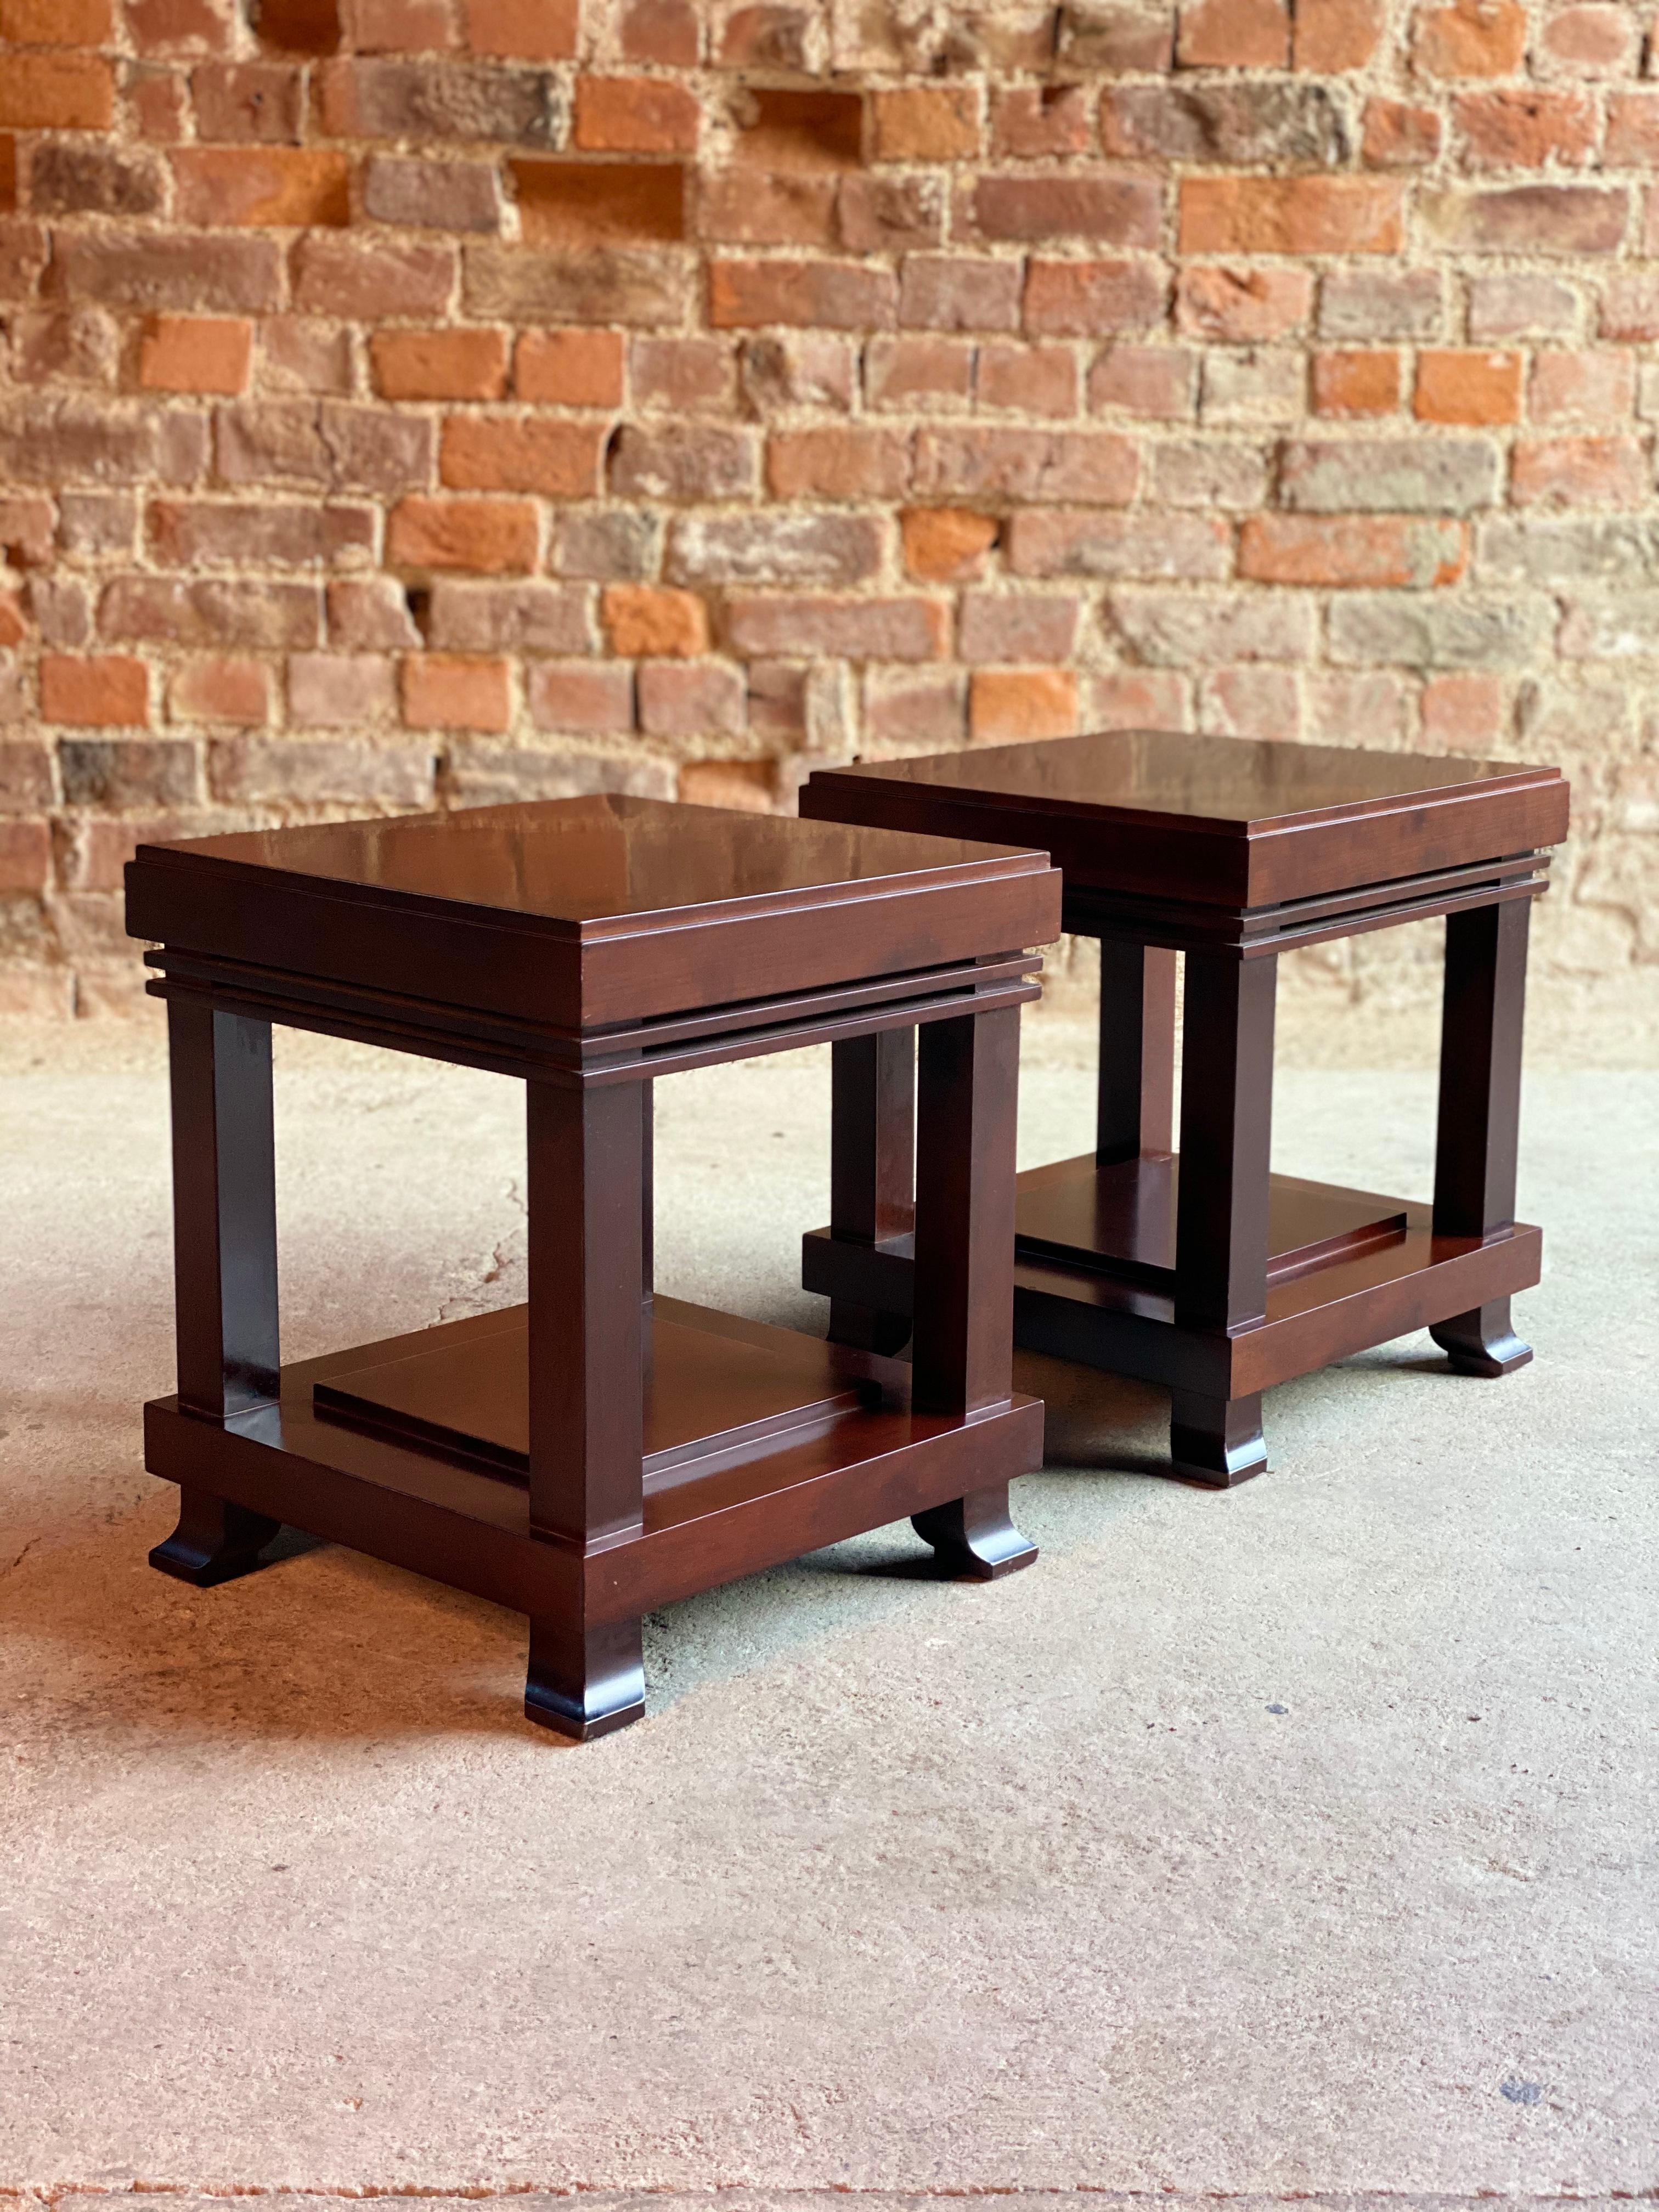 Frank Lloyd Wright ‘Robie’ side tables or stools manufactured by Cassina, circa 1989

Extremely rare Frank Lloyd Wright ‘Robie’ side tables or stools set of four available finished in cherrywood manufactured by Cassina, Frank Lloyd Wright